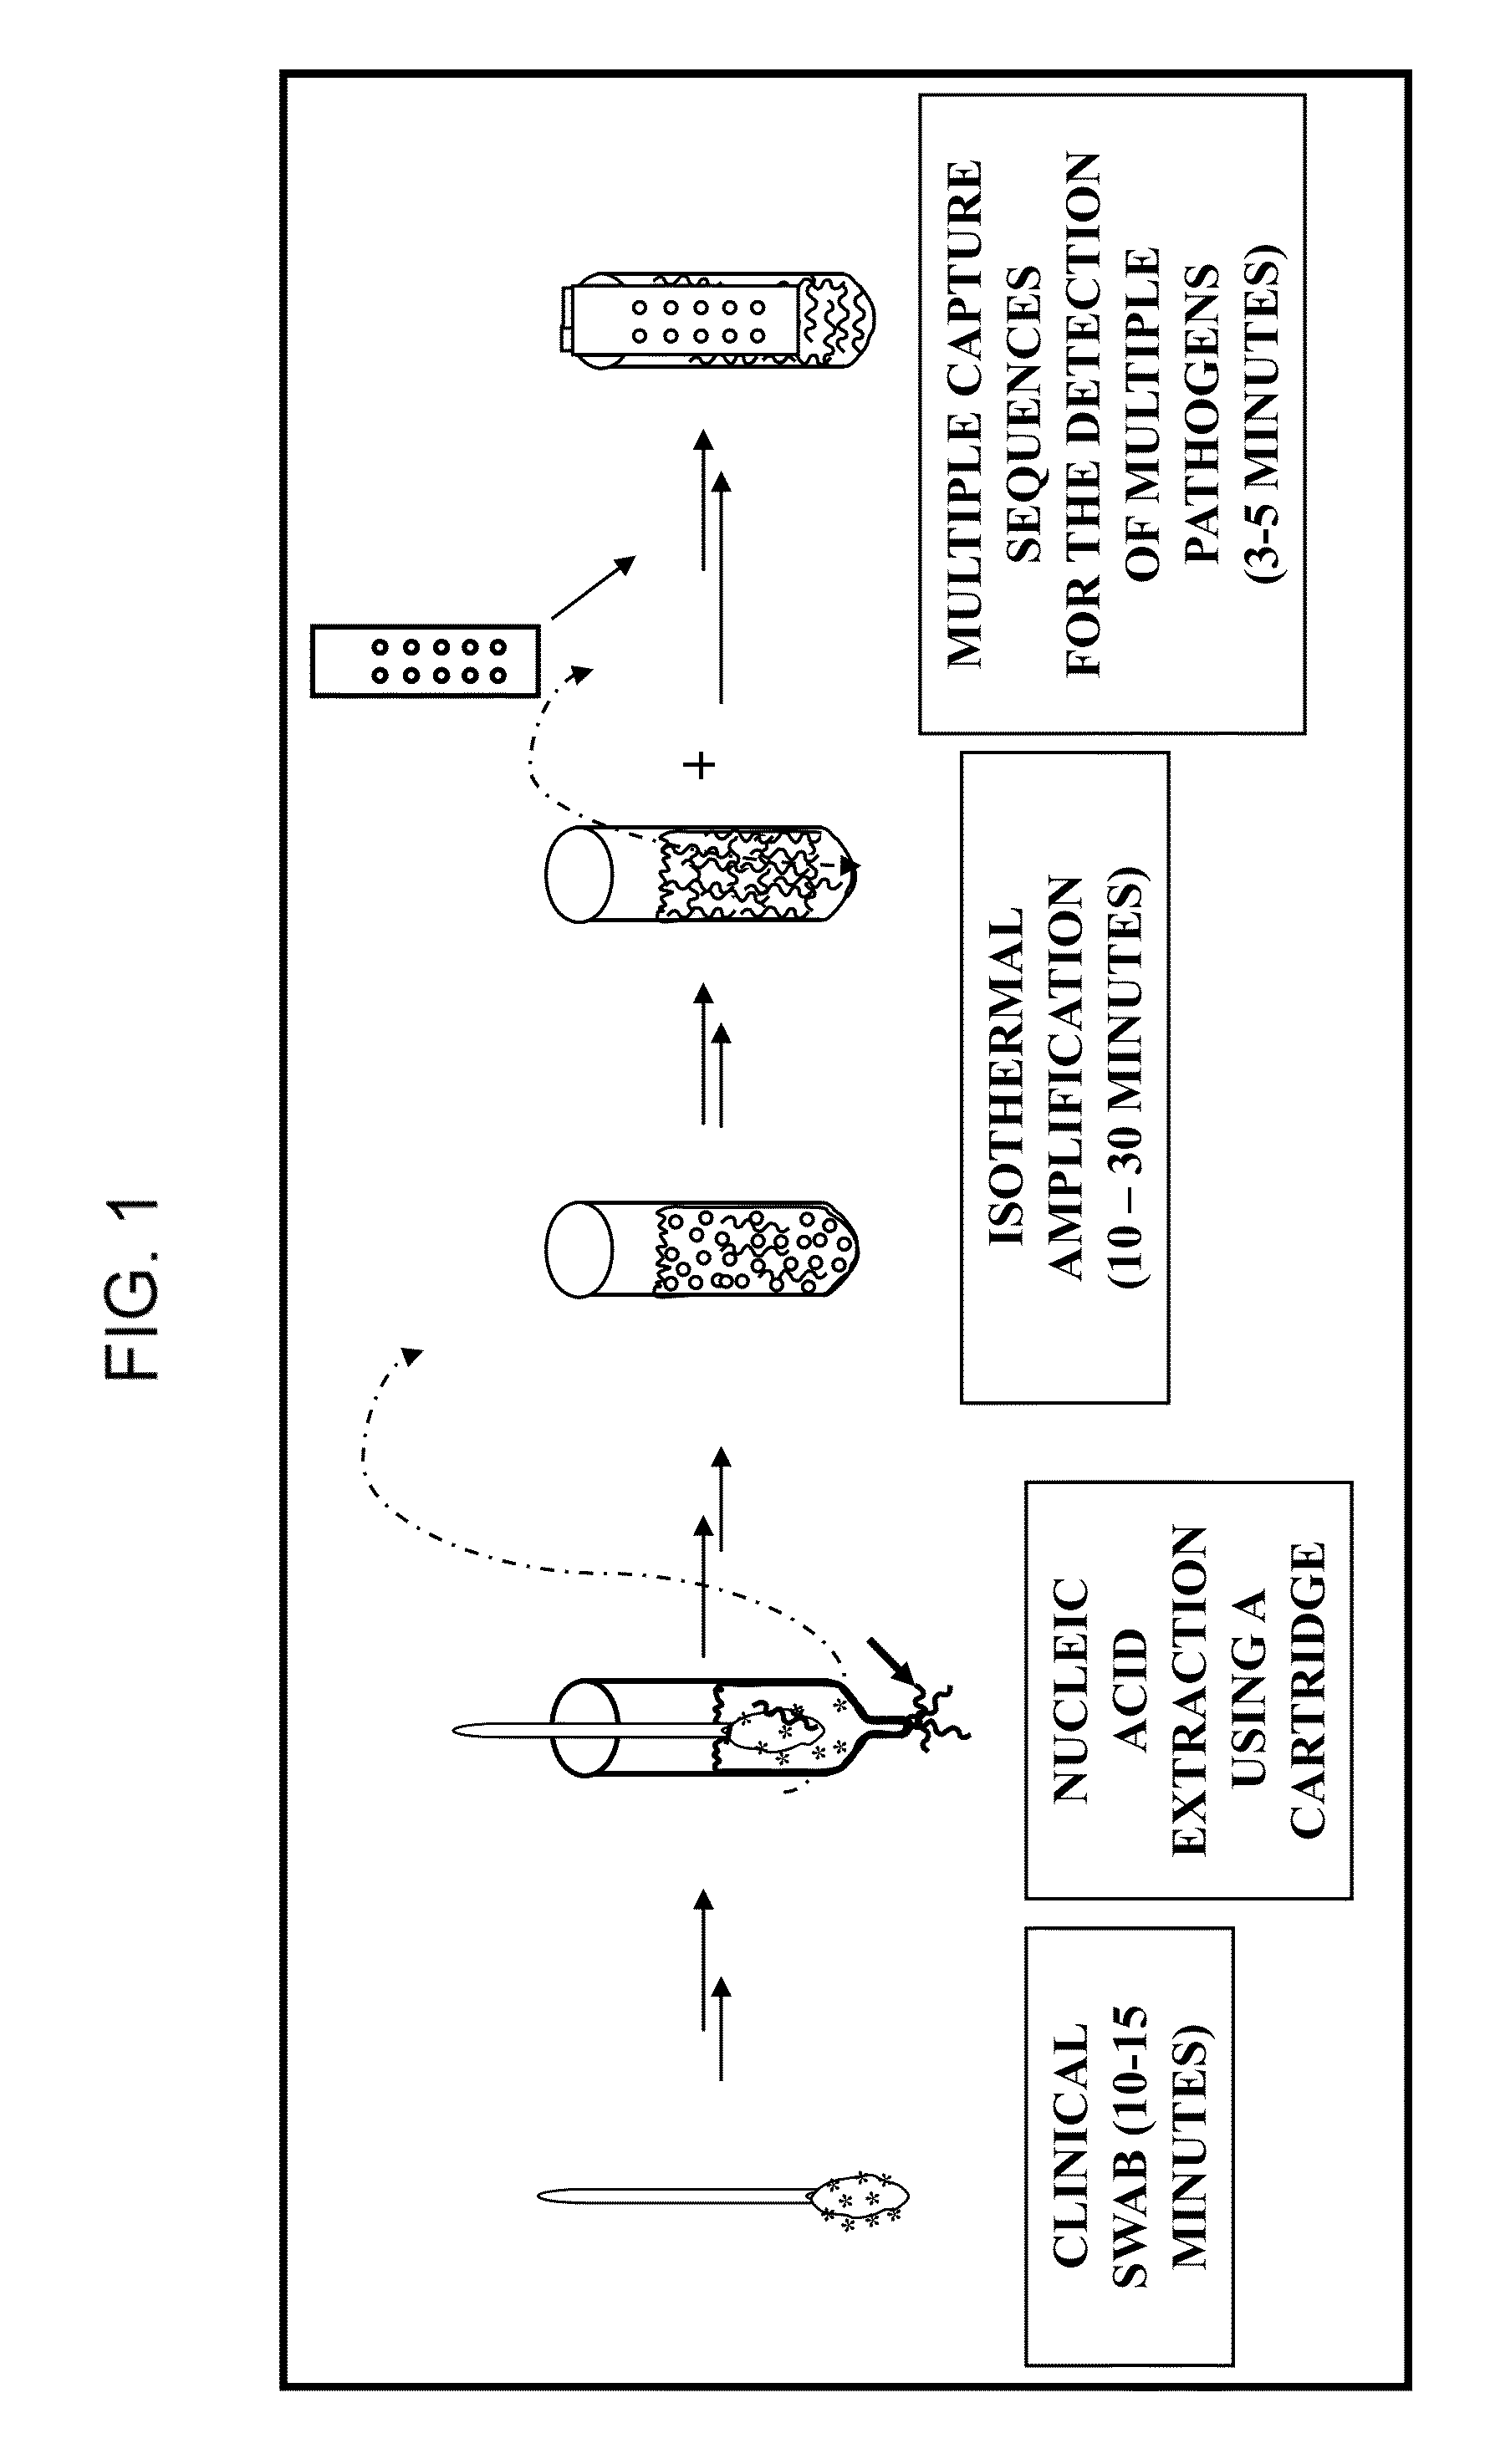 Nucleic Acid Detection System and Method for Detecting Influenza